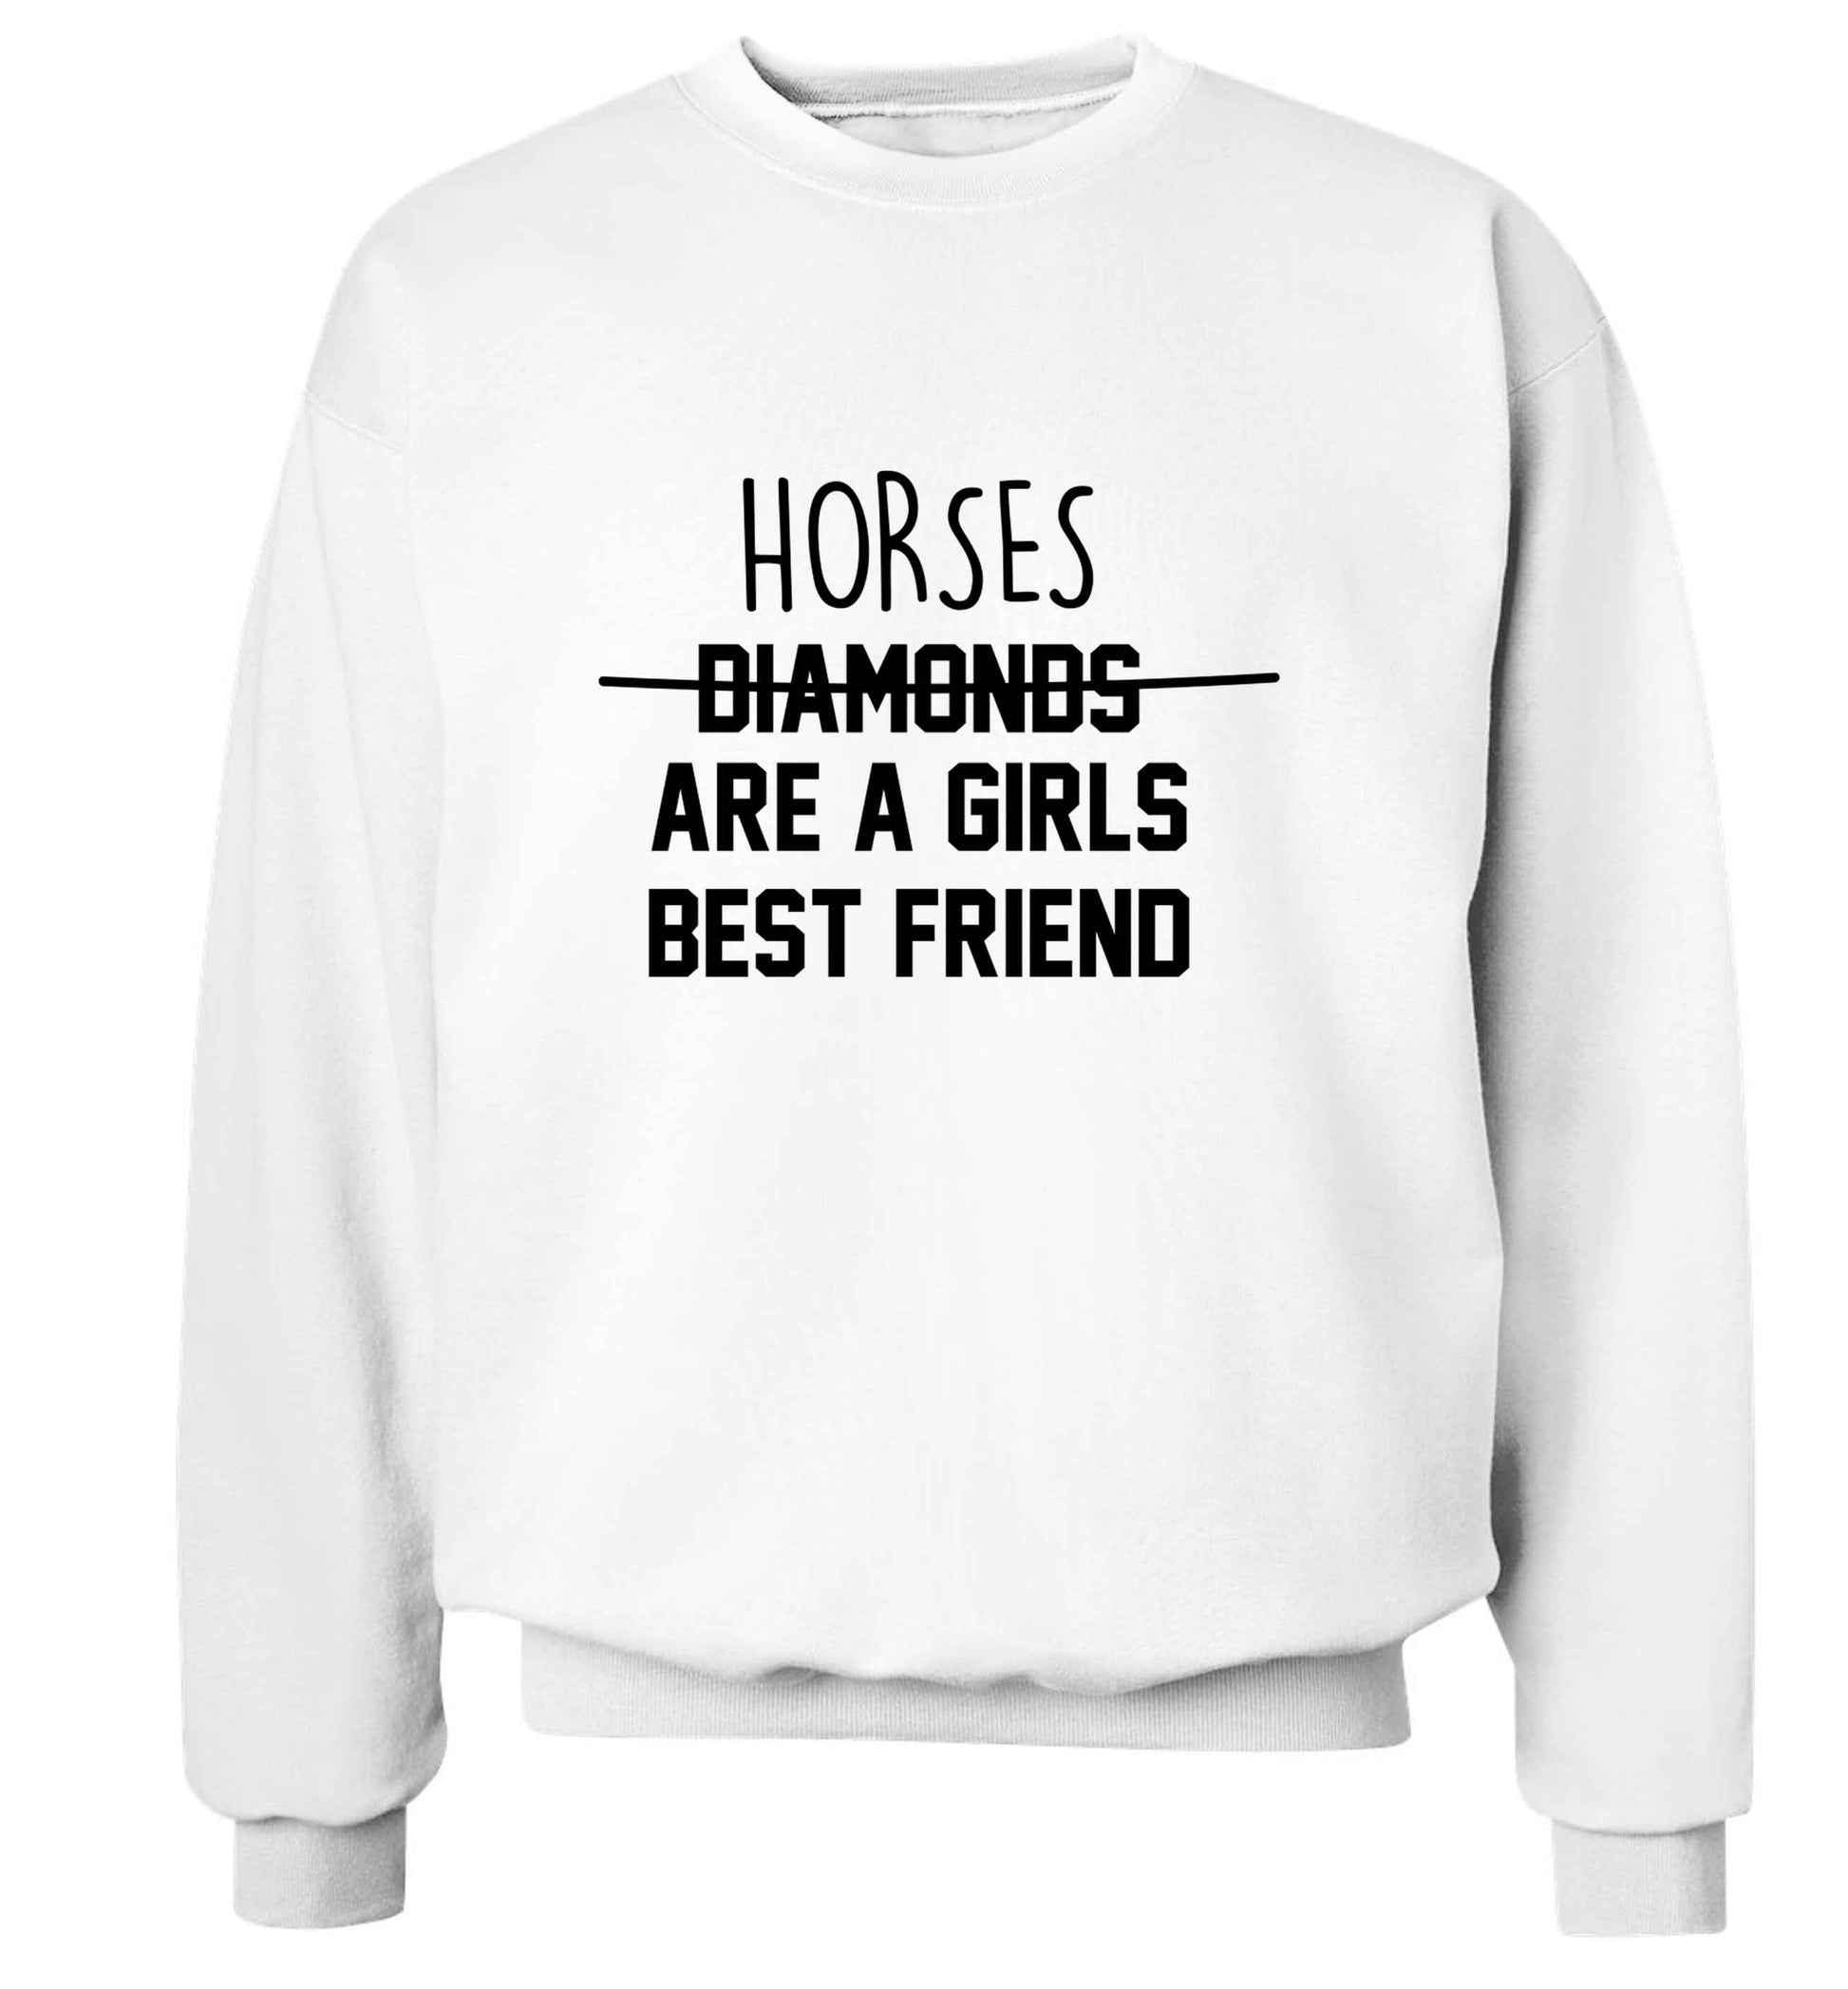 Horses are a girls best friend adult's unisex white sweater 2XL